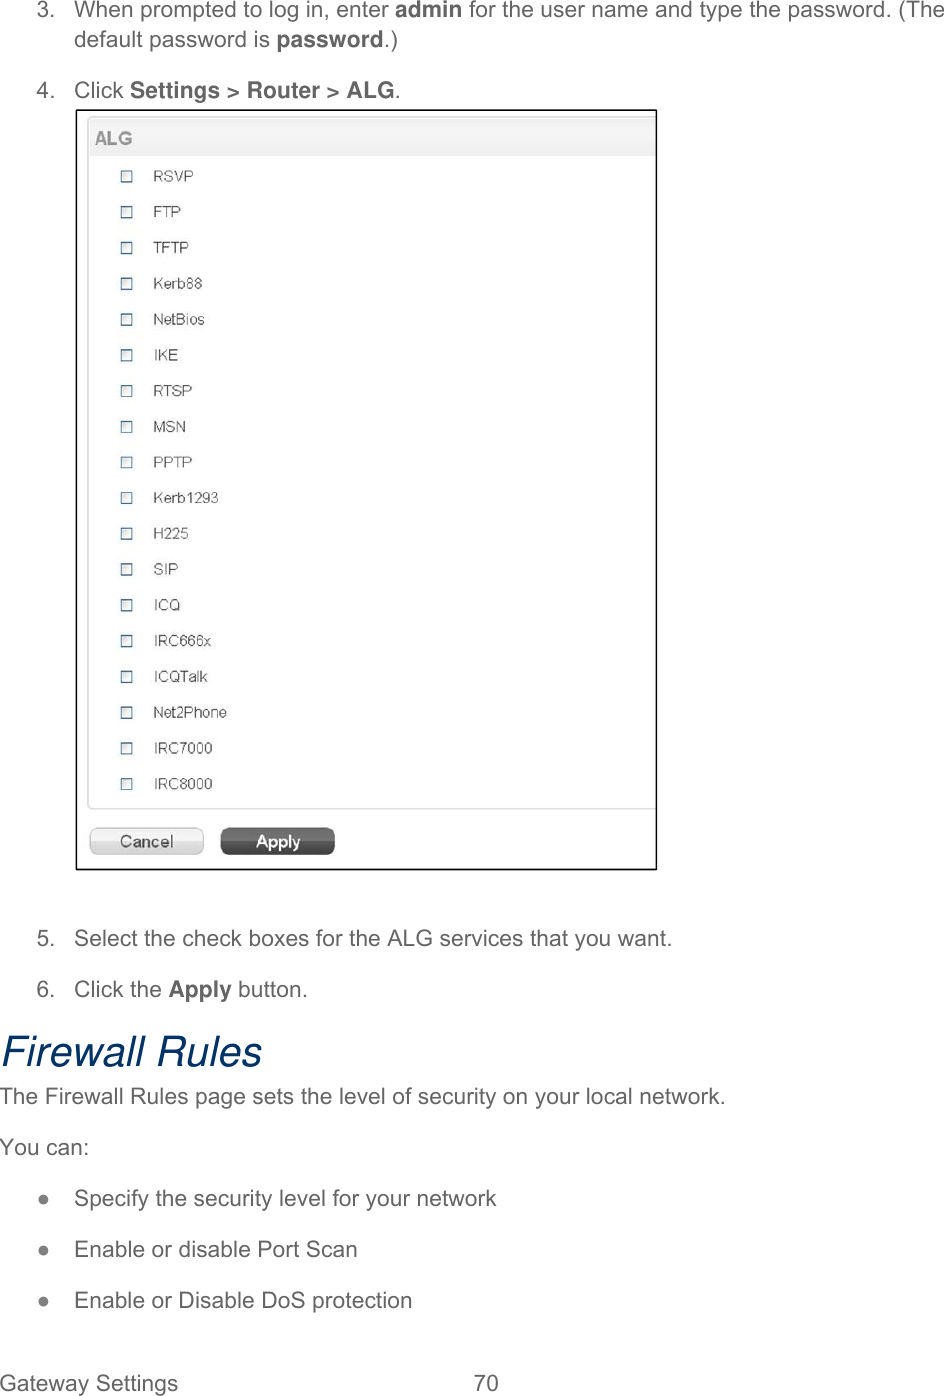 Gateway Settings  70   3.  When prompted to log in, enter admin for the user name and type the password. (The default password is password.) 4. Click Settings &gt; Router &gt; ALG.   5.  Select the check boxes for the ALG services that you want. 6. Click the Apply button. Firewall Rules The Firewall Rules page sets the level of security on your local network. You can: ● Specify the security level for your network ● Enable or disable Port Scan ● Enable or Disable DoS protection 